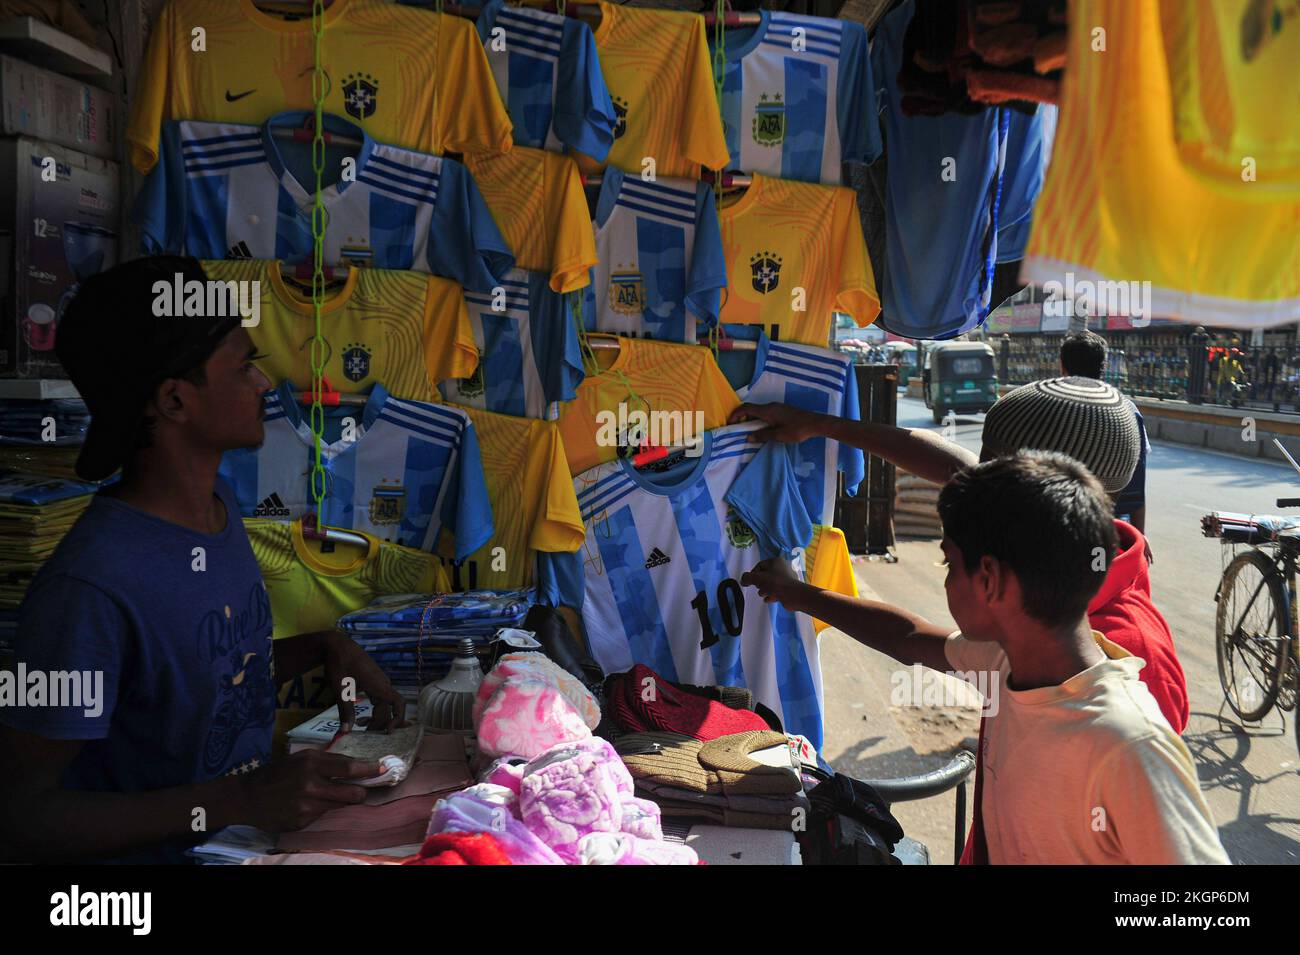 Nov 22, 2022, Sylhet, Bangladesh Fans buying jersey and Flags of their favorite football team at outside market during the FIFA World Cup 2022, todays match between Argentina vs Saudi Arabia .